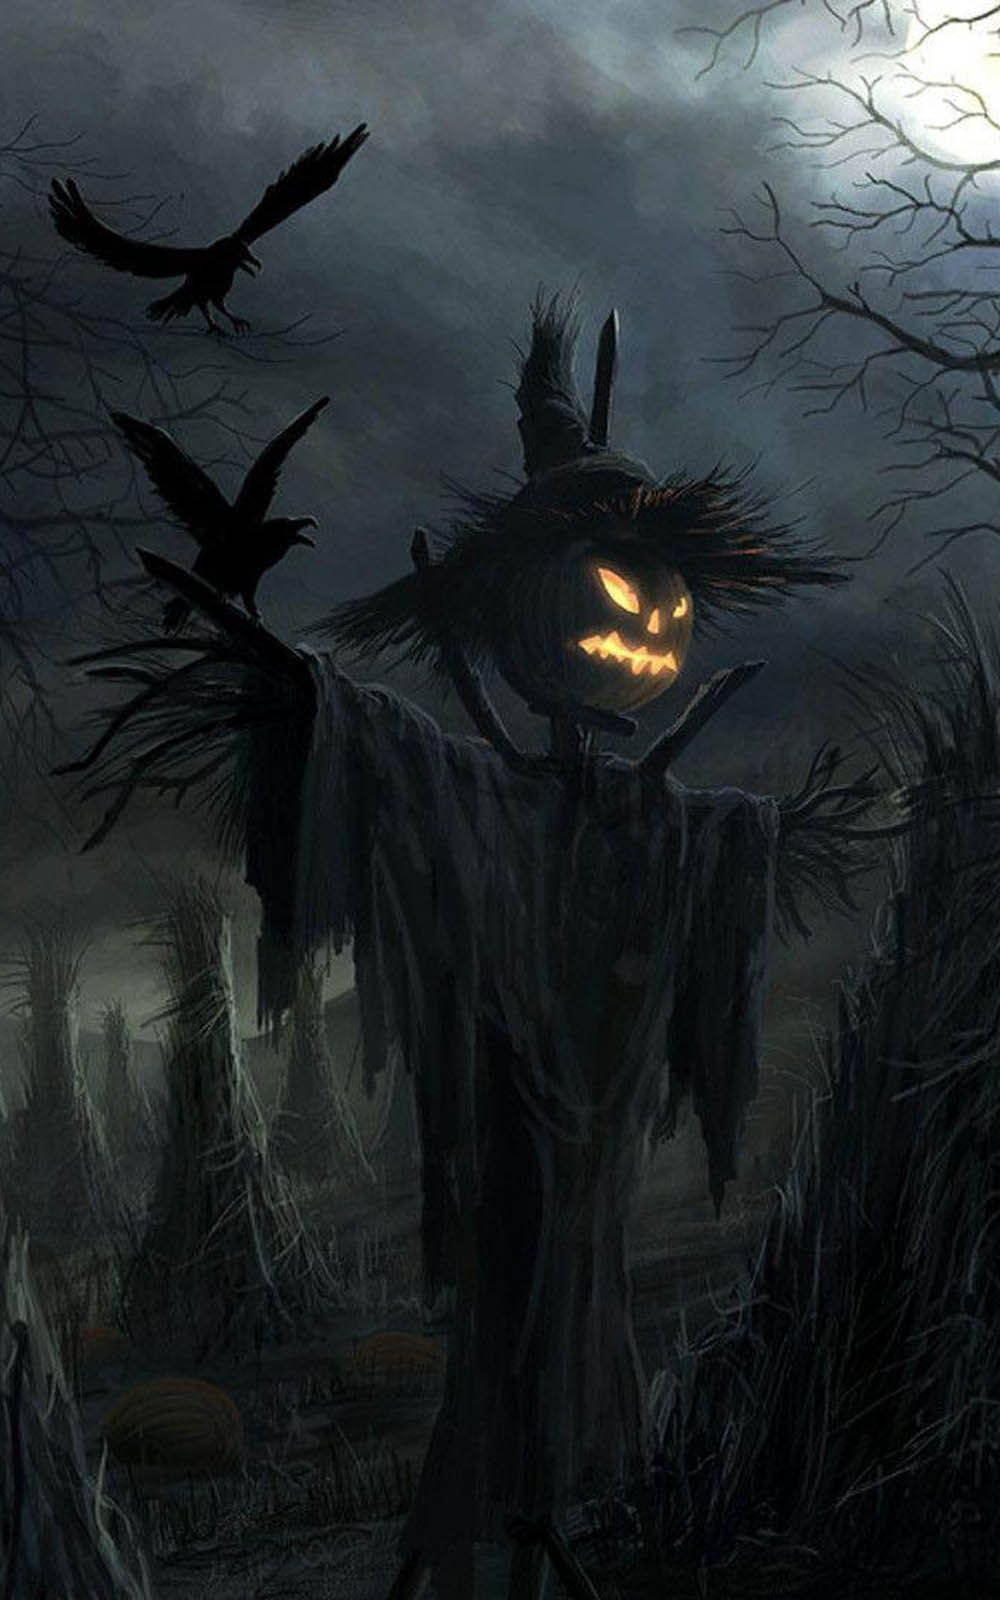 Scare your friends on Halloween with this Scary Halloween Iphone wallpaper! Wallpaper